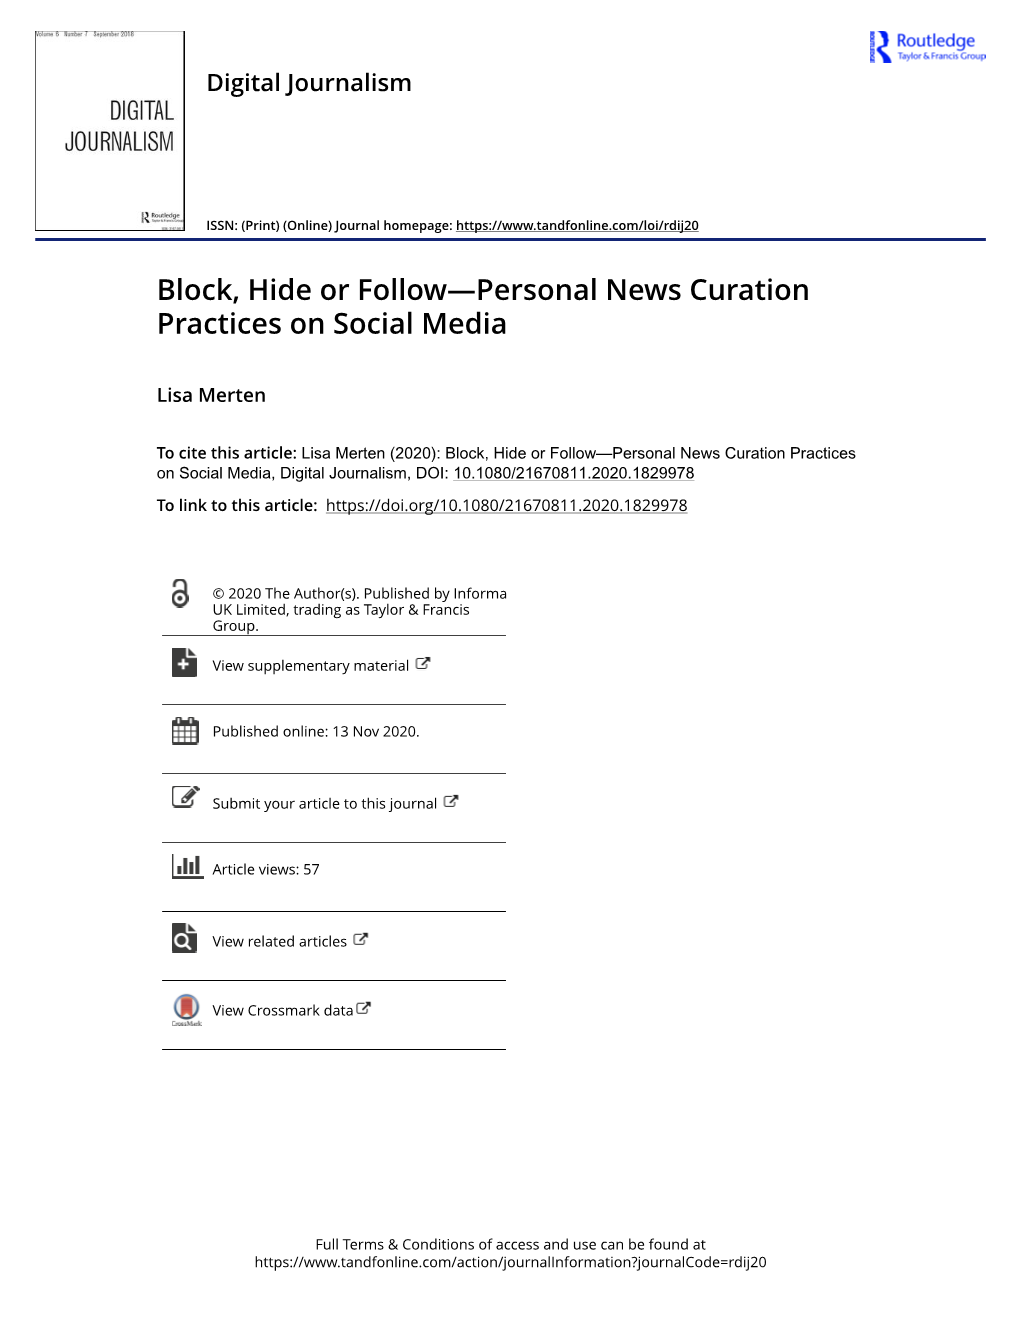 Block, Hide Or Follow—Personal News Curation Practices on Social Media